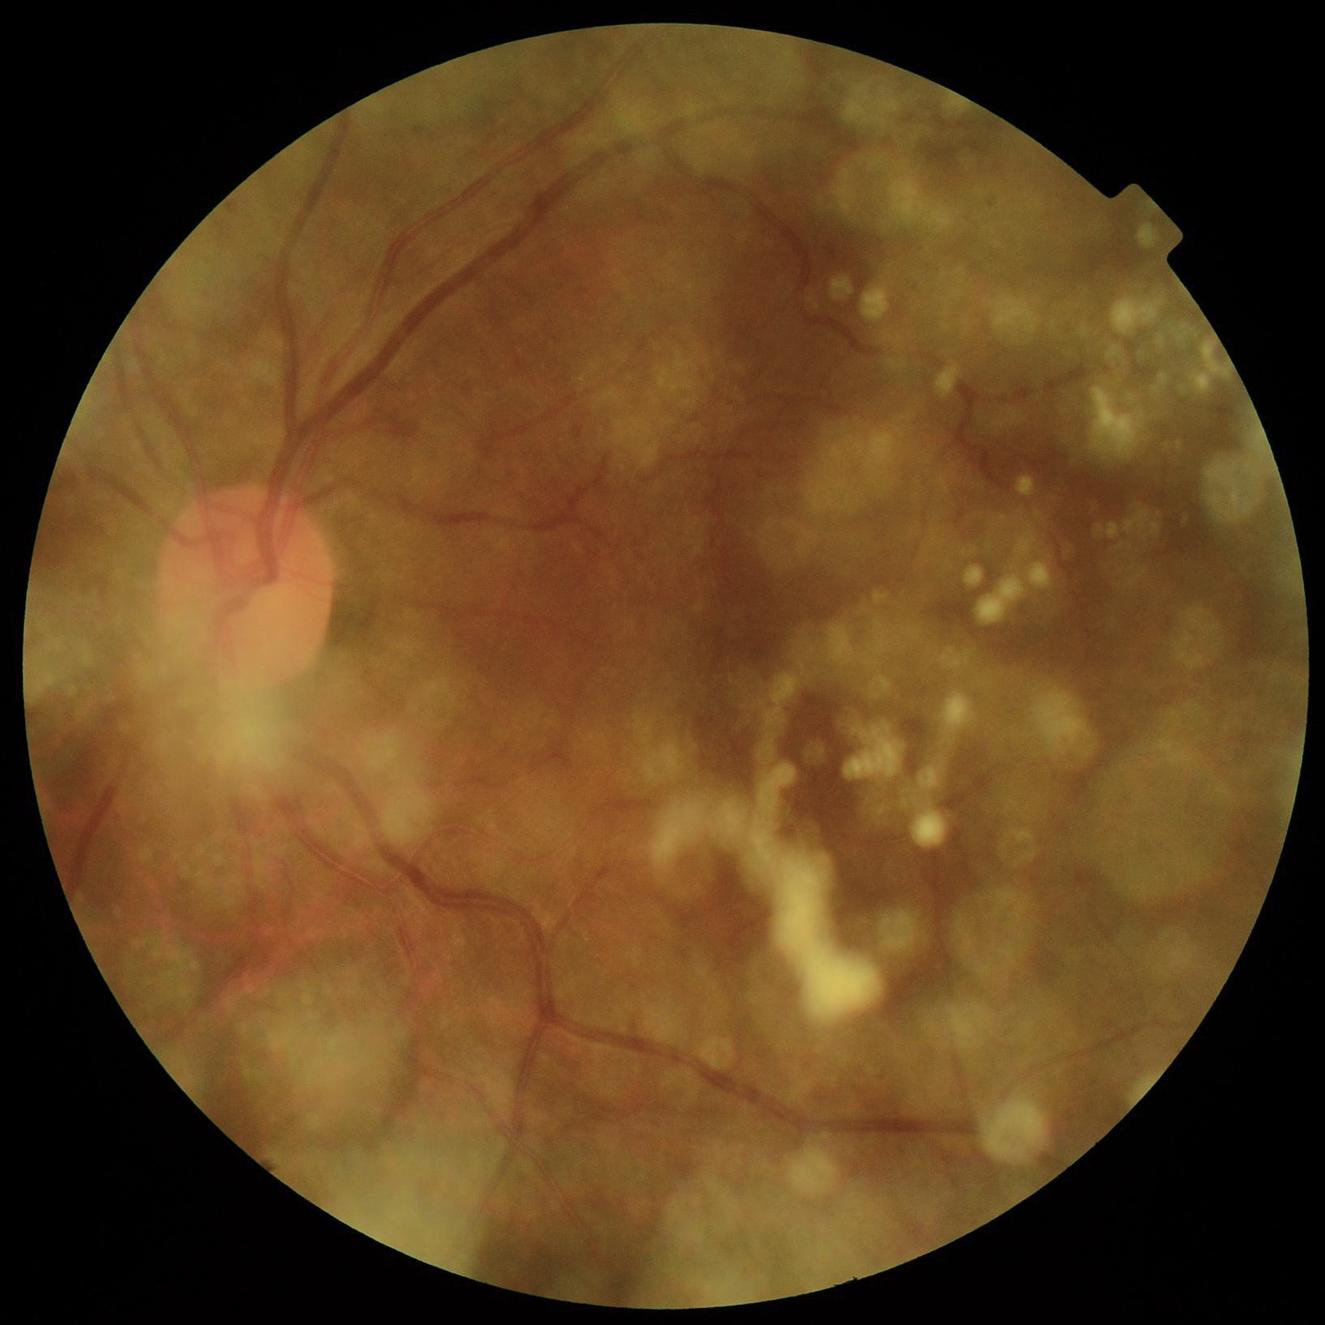 Fundus photograph taken with a conventional fundus camera